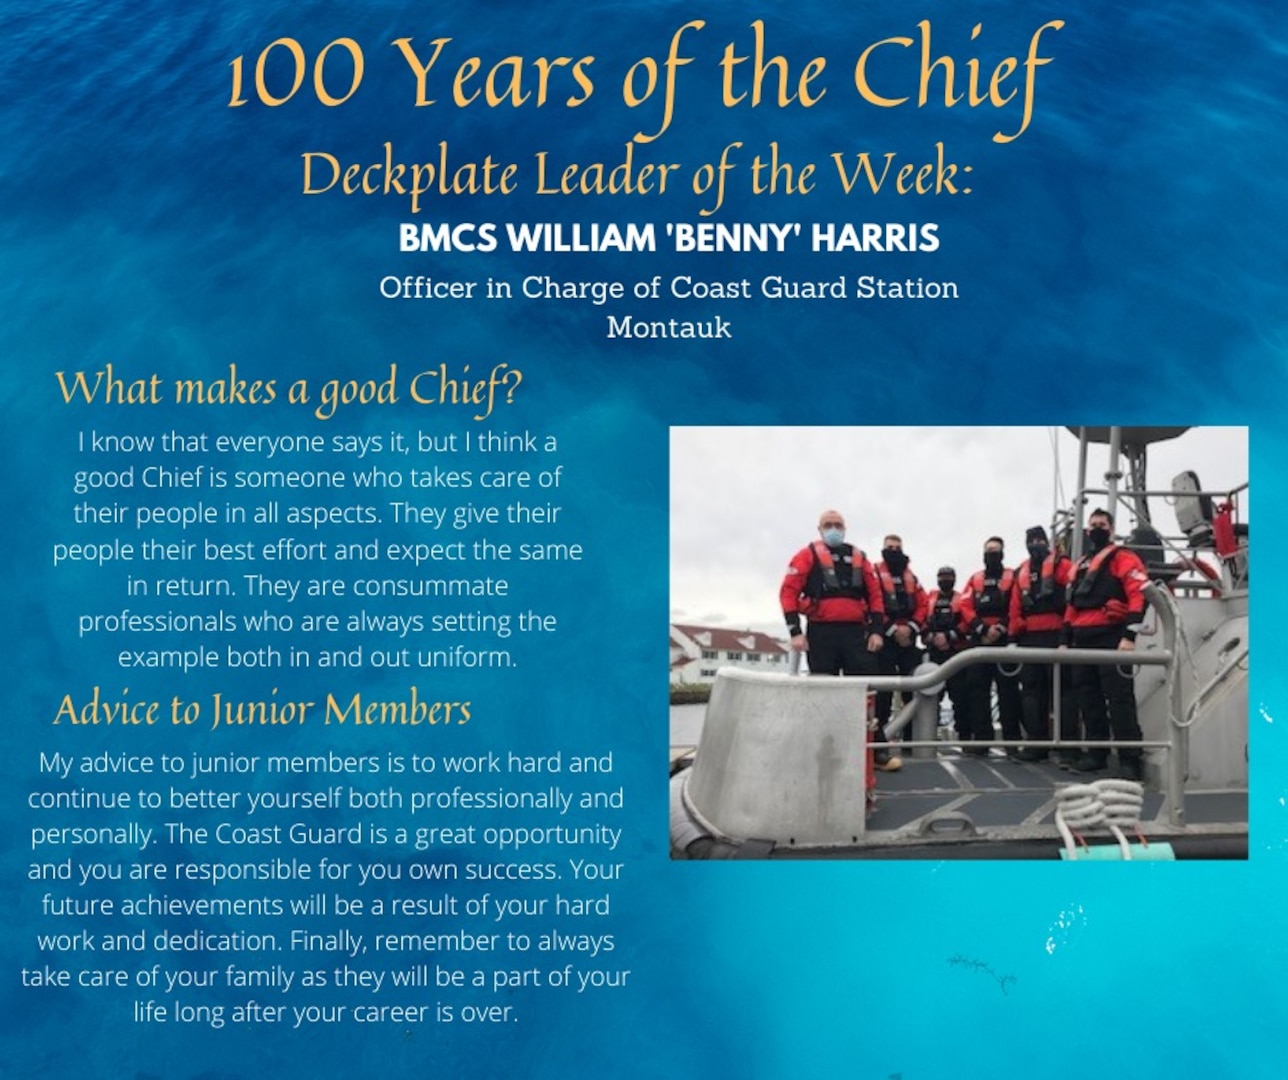 Our deckplate leader of the week is Senior Chief Petty Officer William ‘Benny’ Harris, a boatswain’s mate and the officer in charge at U.S. Coast Guard Station Montauk, New York.